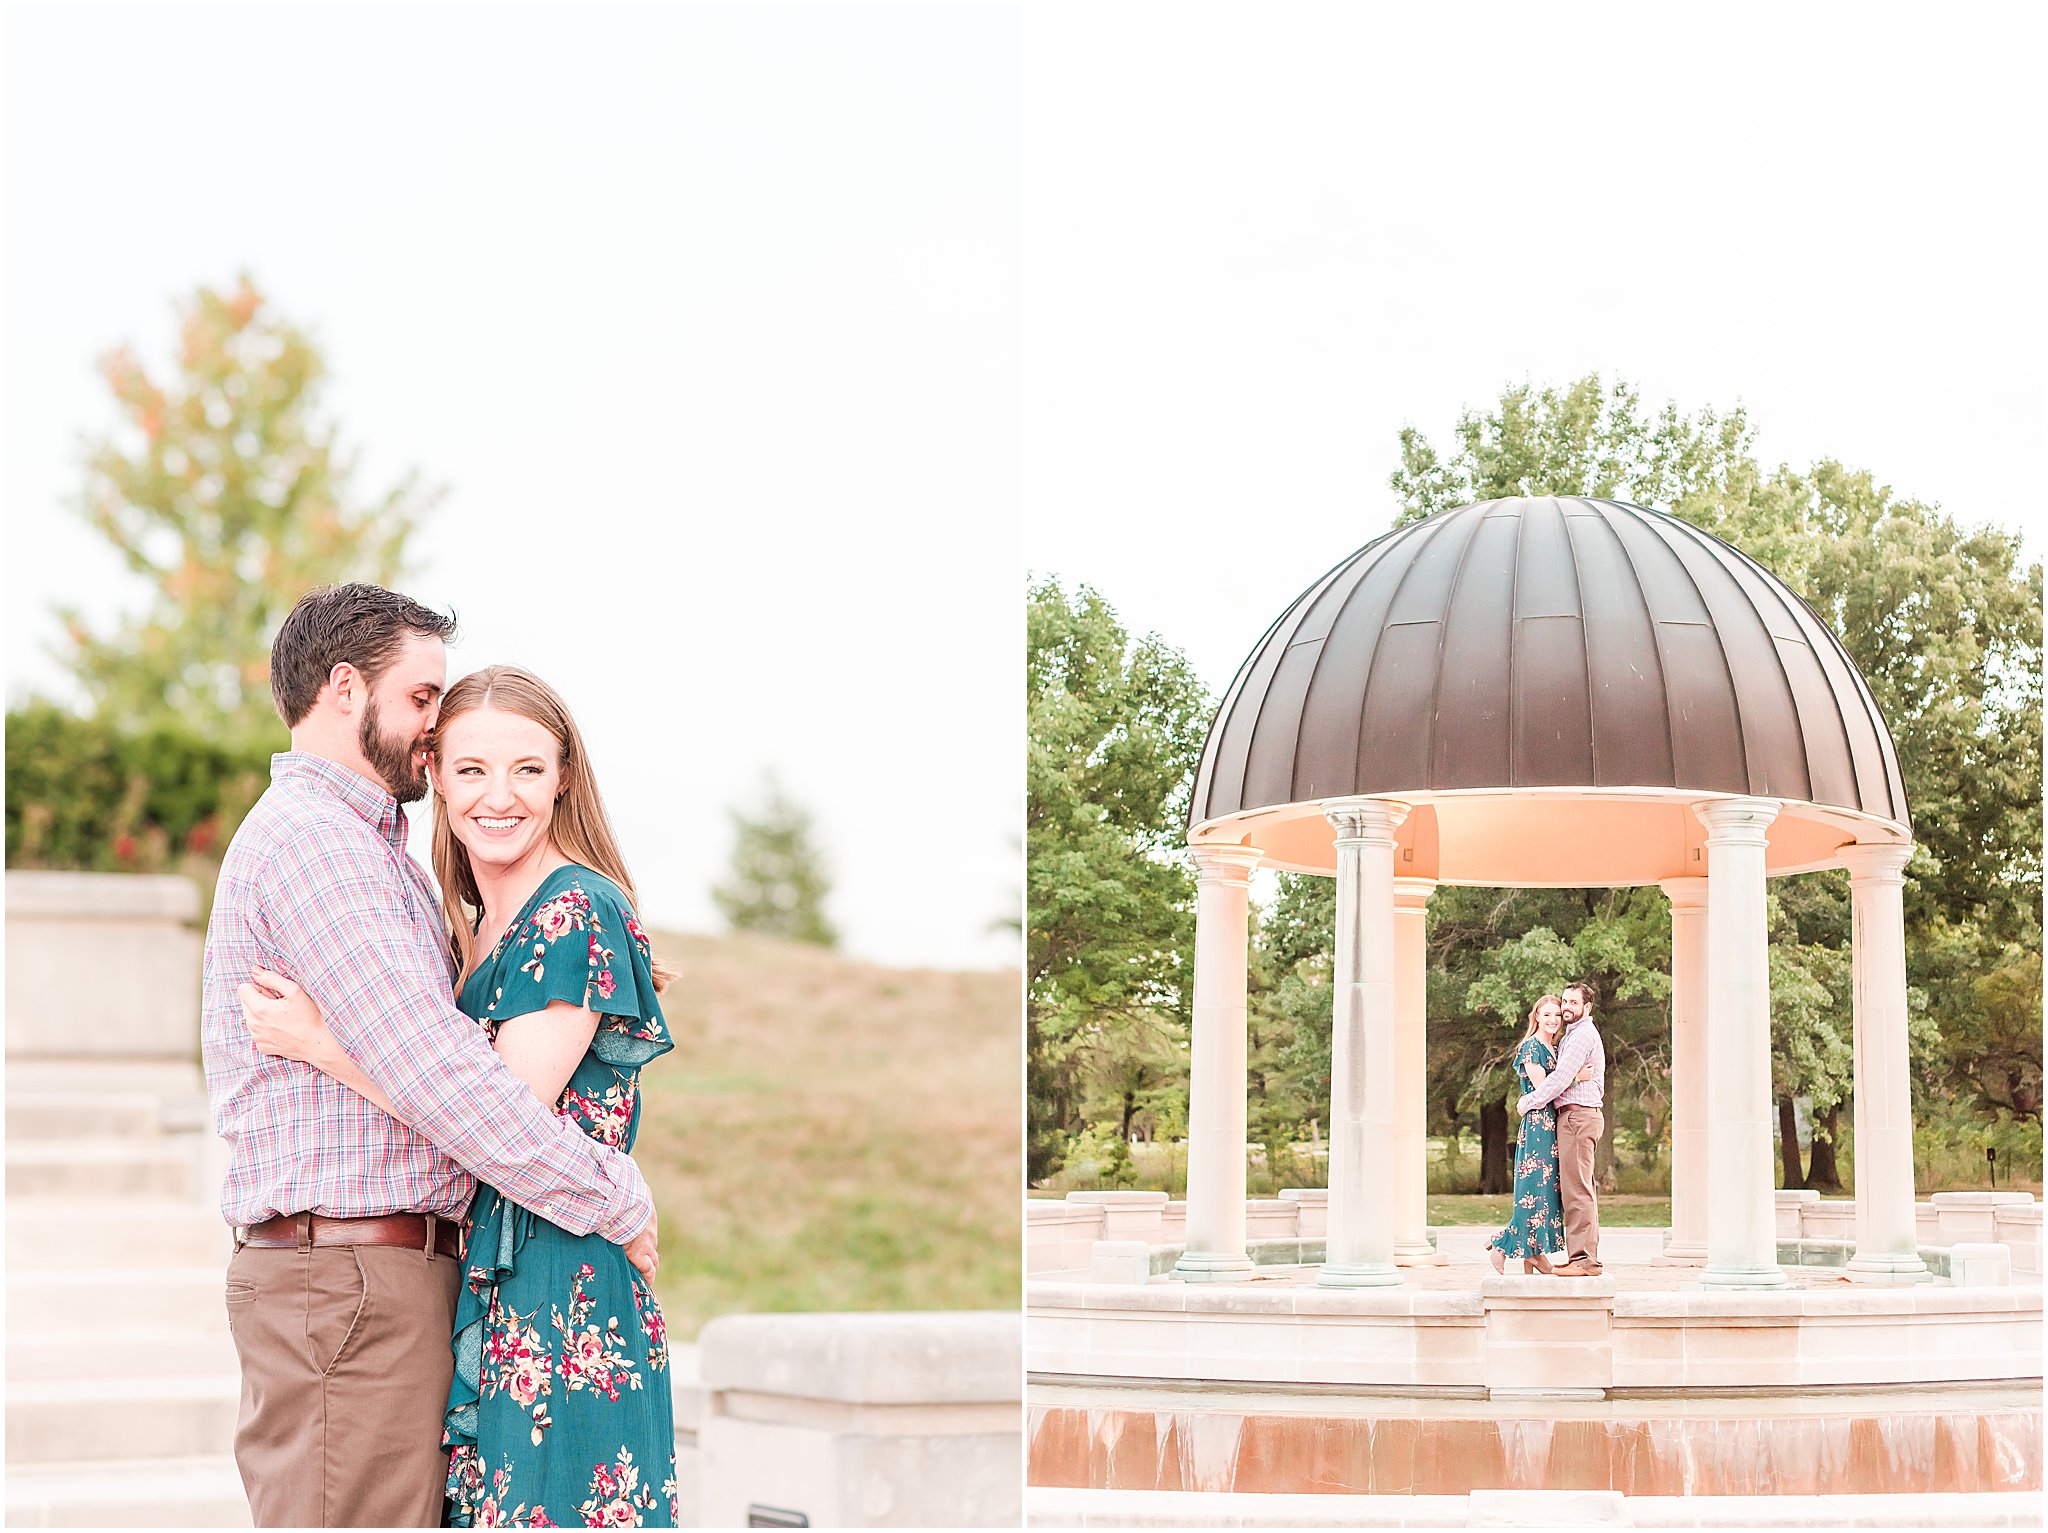 Bride and groom smiling from gazebo during Coxhall Gardens engagement session